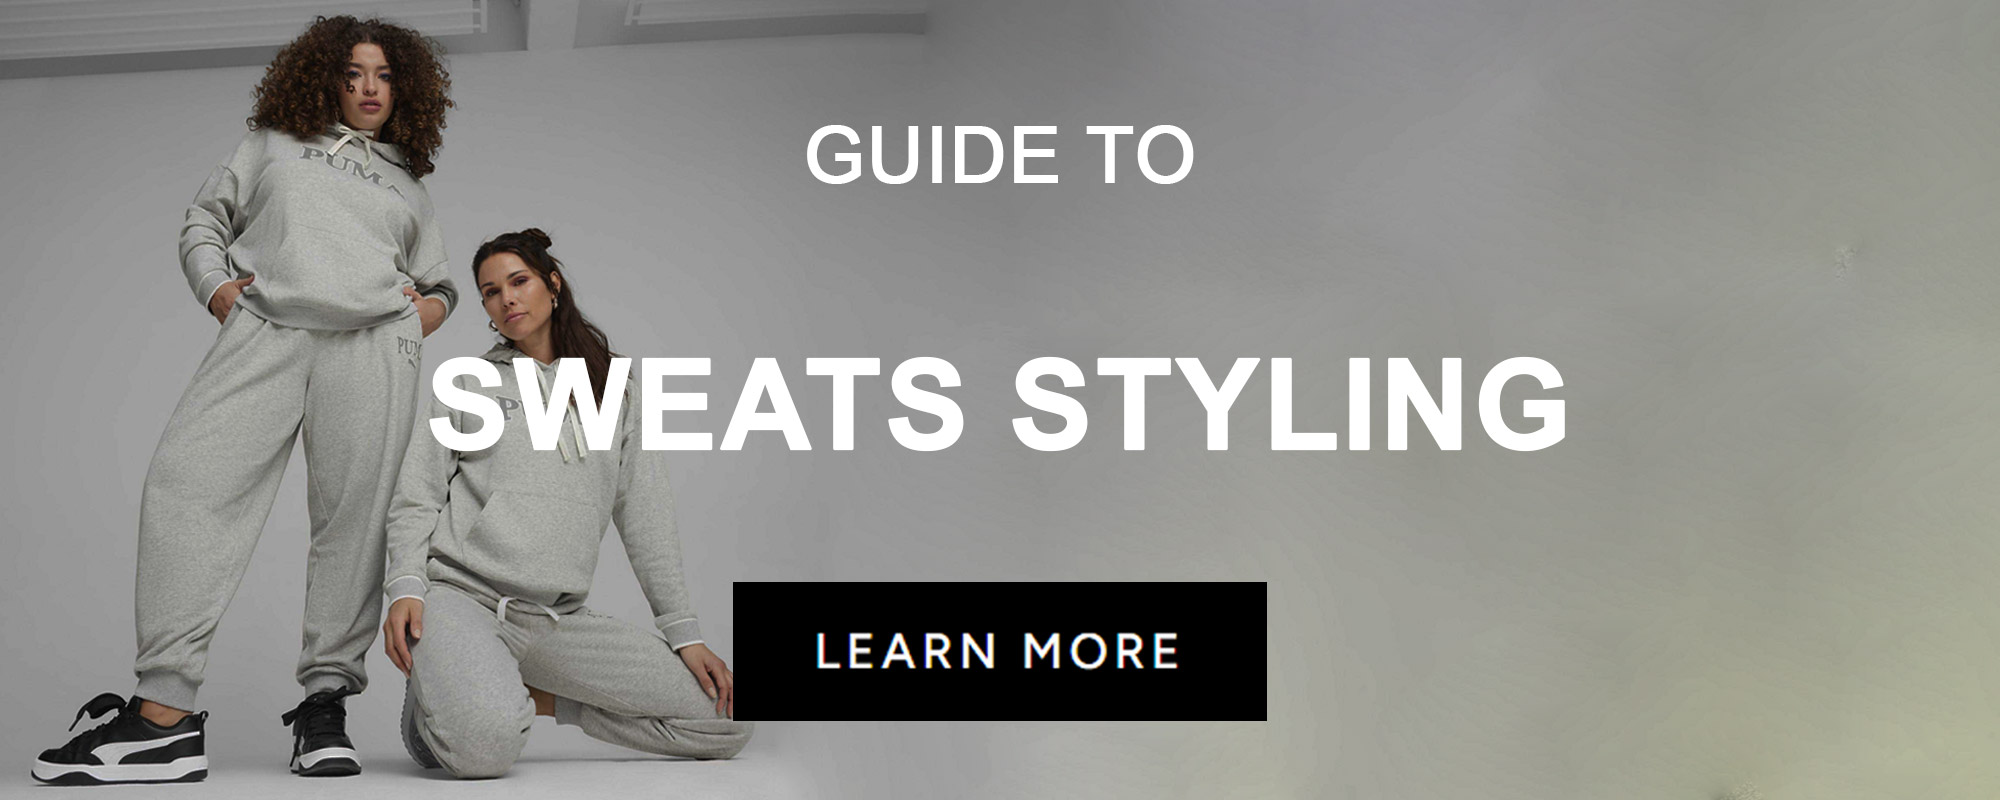 GUIDES_CLOTHES_SweatsStyling.jpg